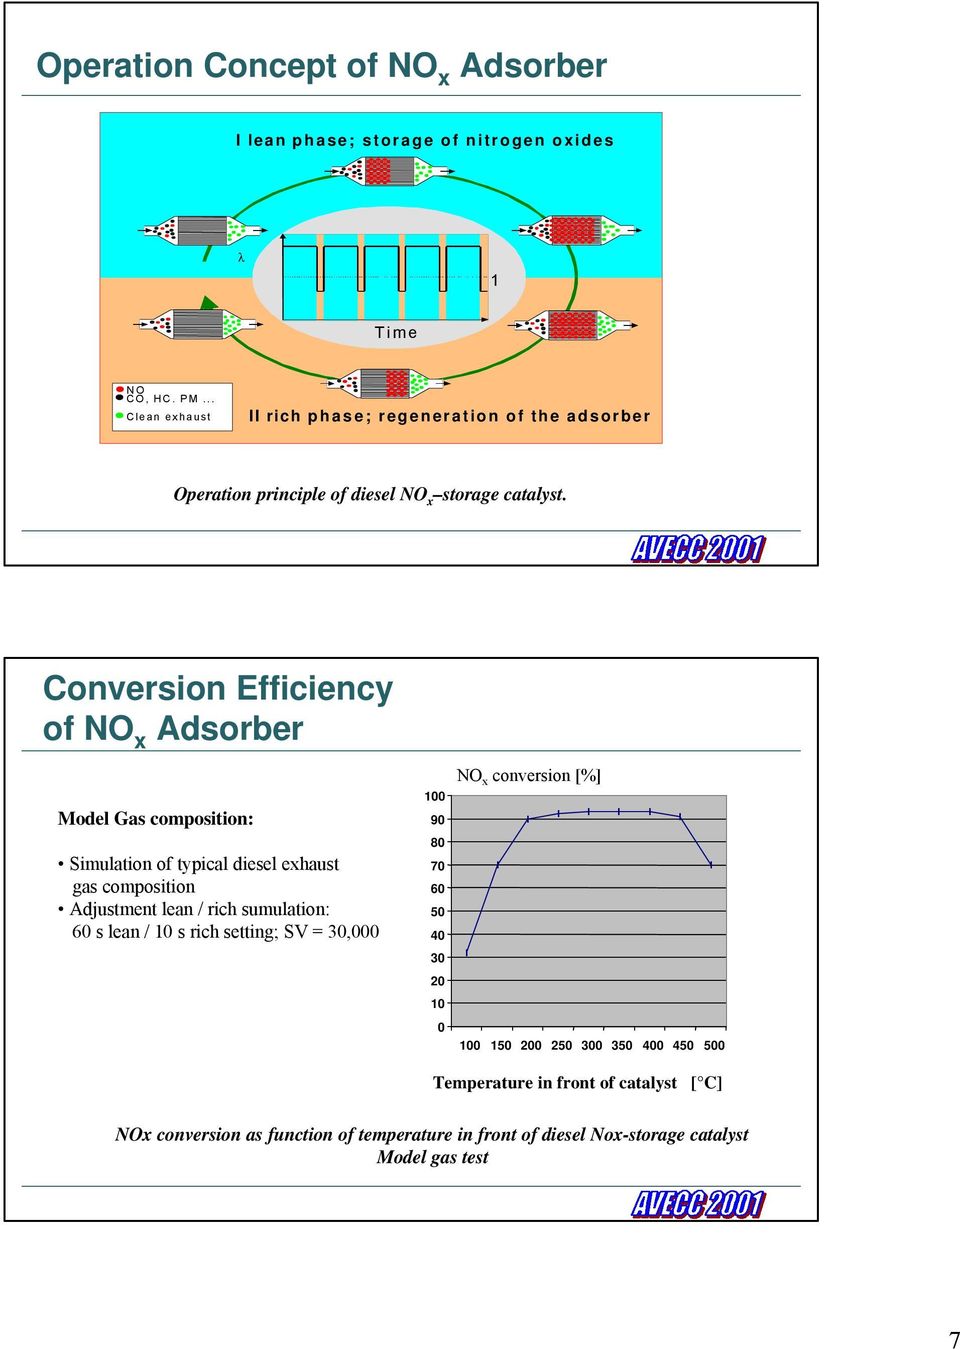 Conversion Efficiency of NO x Adsorber Model Gas composition: Simulation of typical diesel exhaust gas composition Adjustment lean / rich sumulation: 60 s